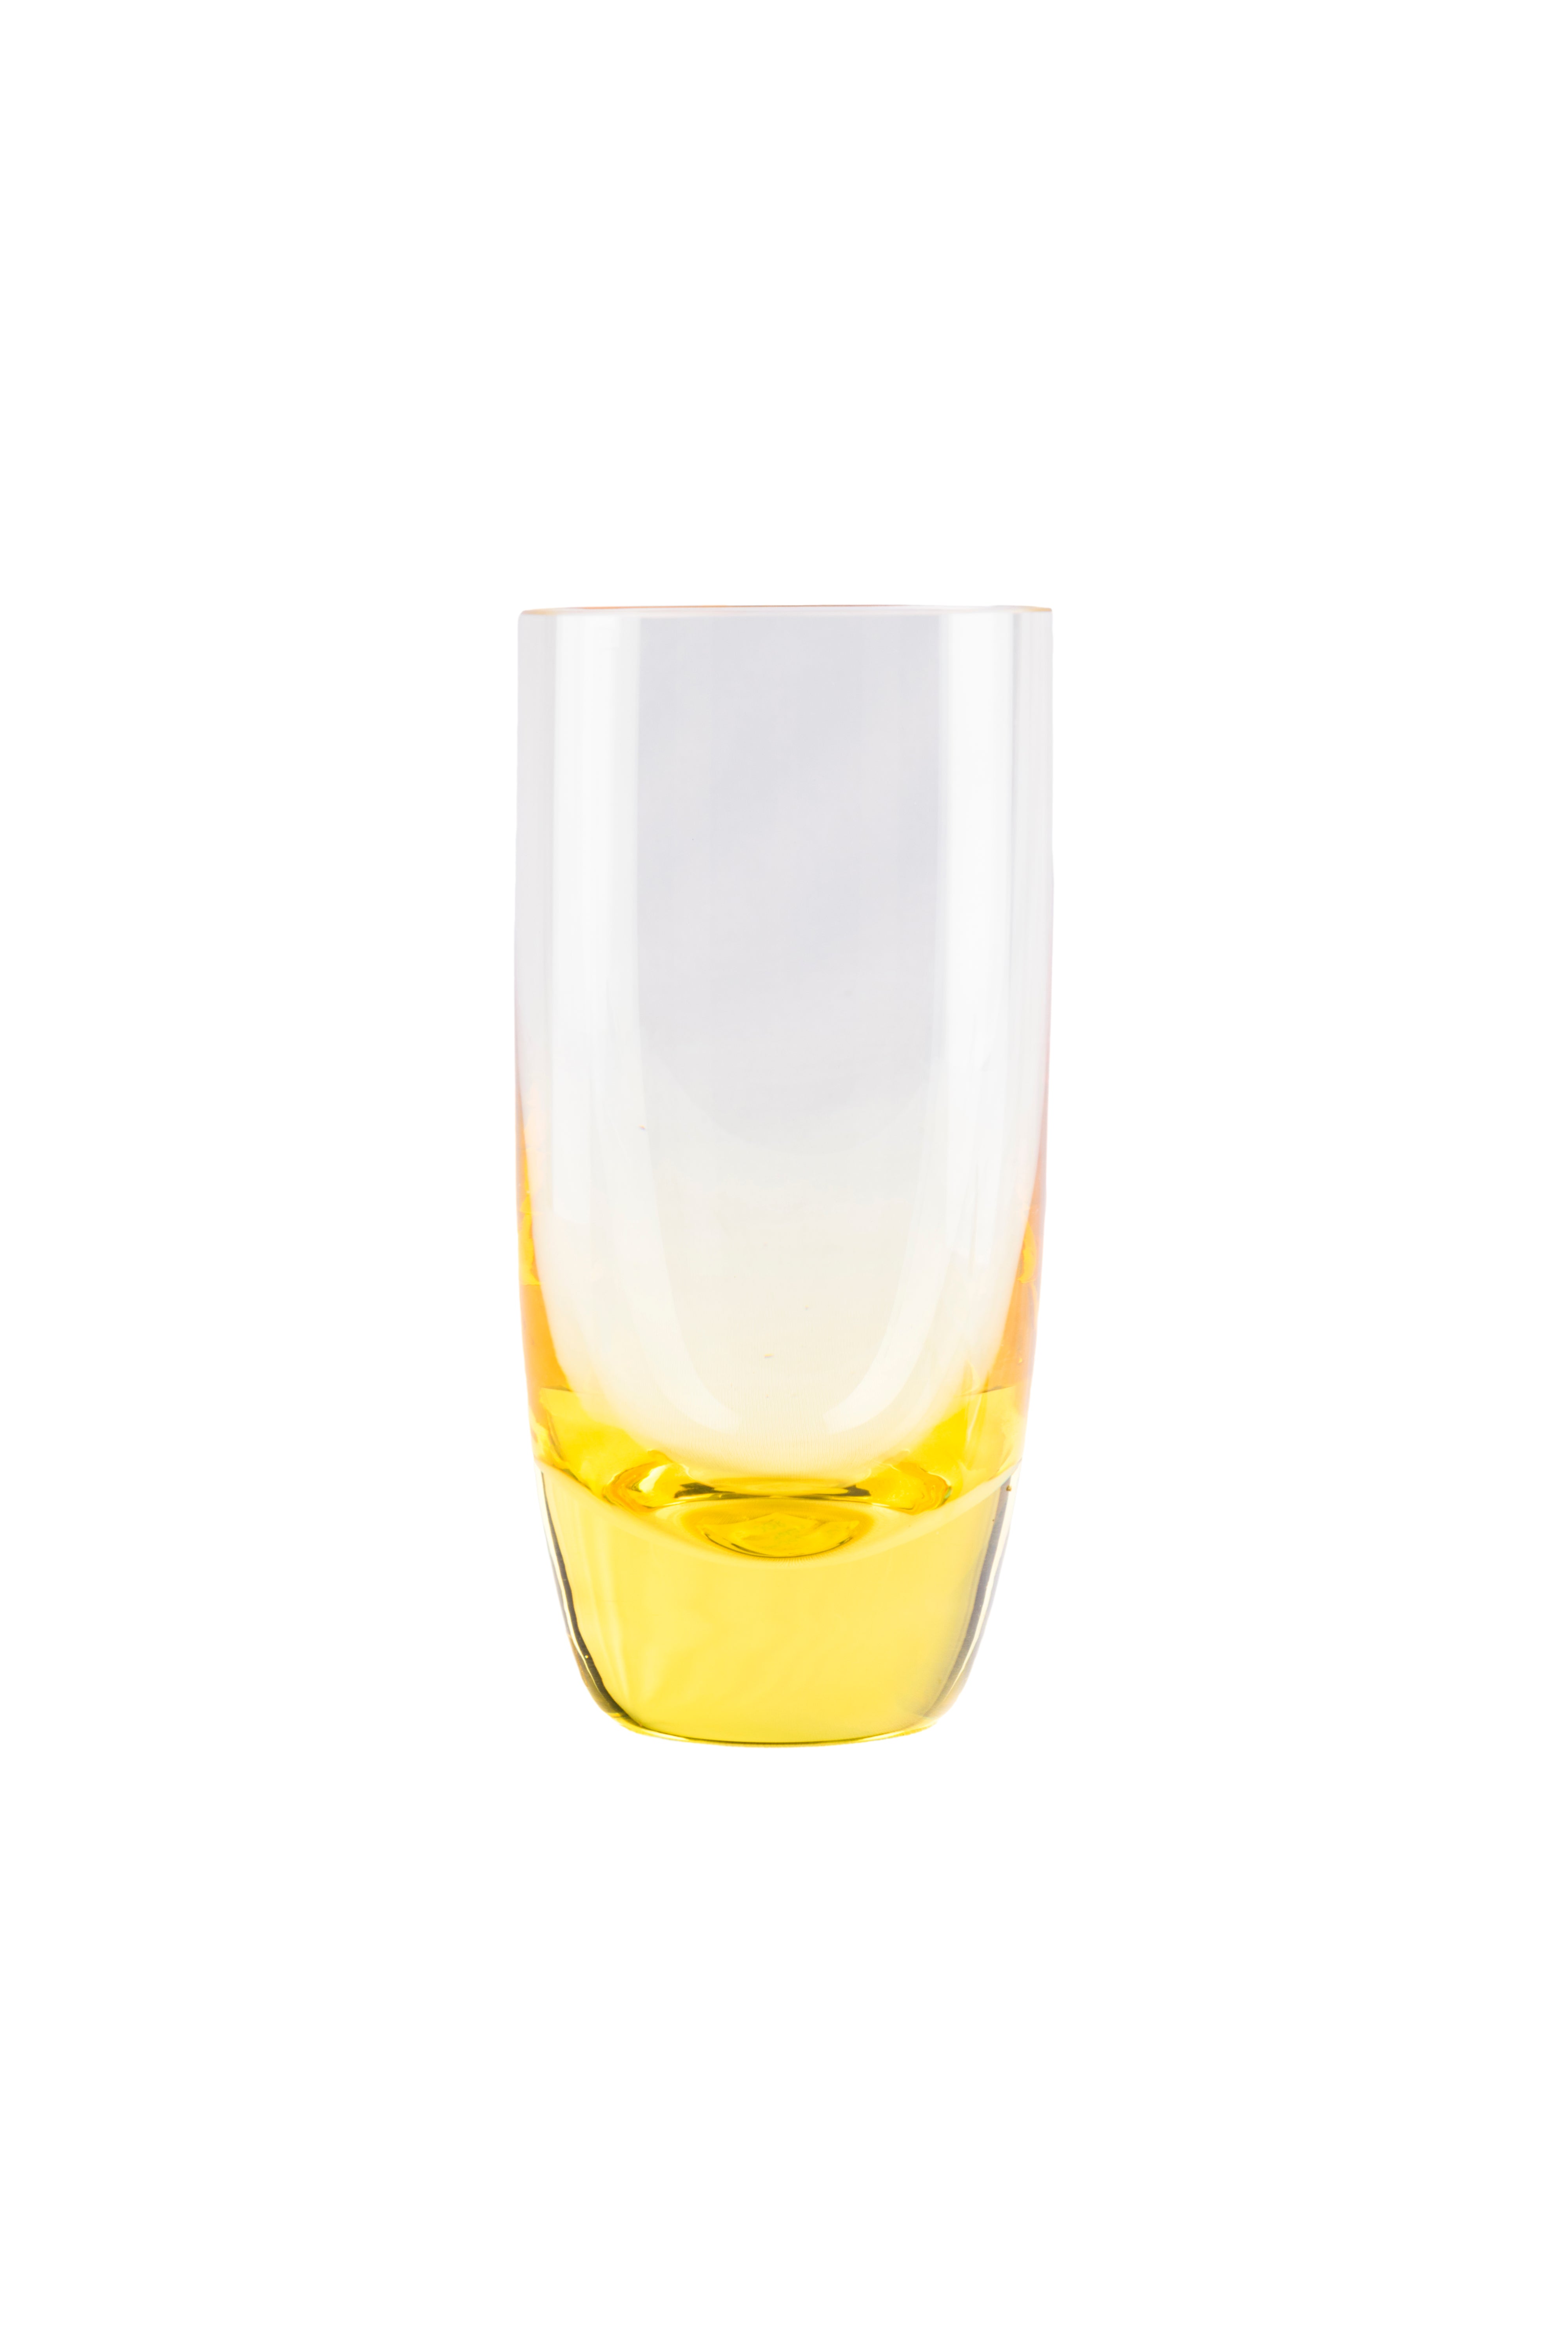 MOSER - Yellow Tint Liqueur Glass - Raise a toast in style and create unforgettable moments.